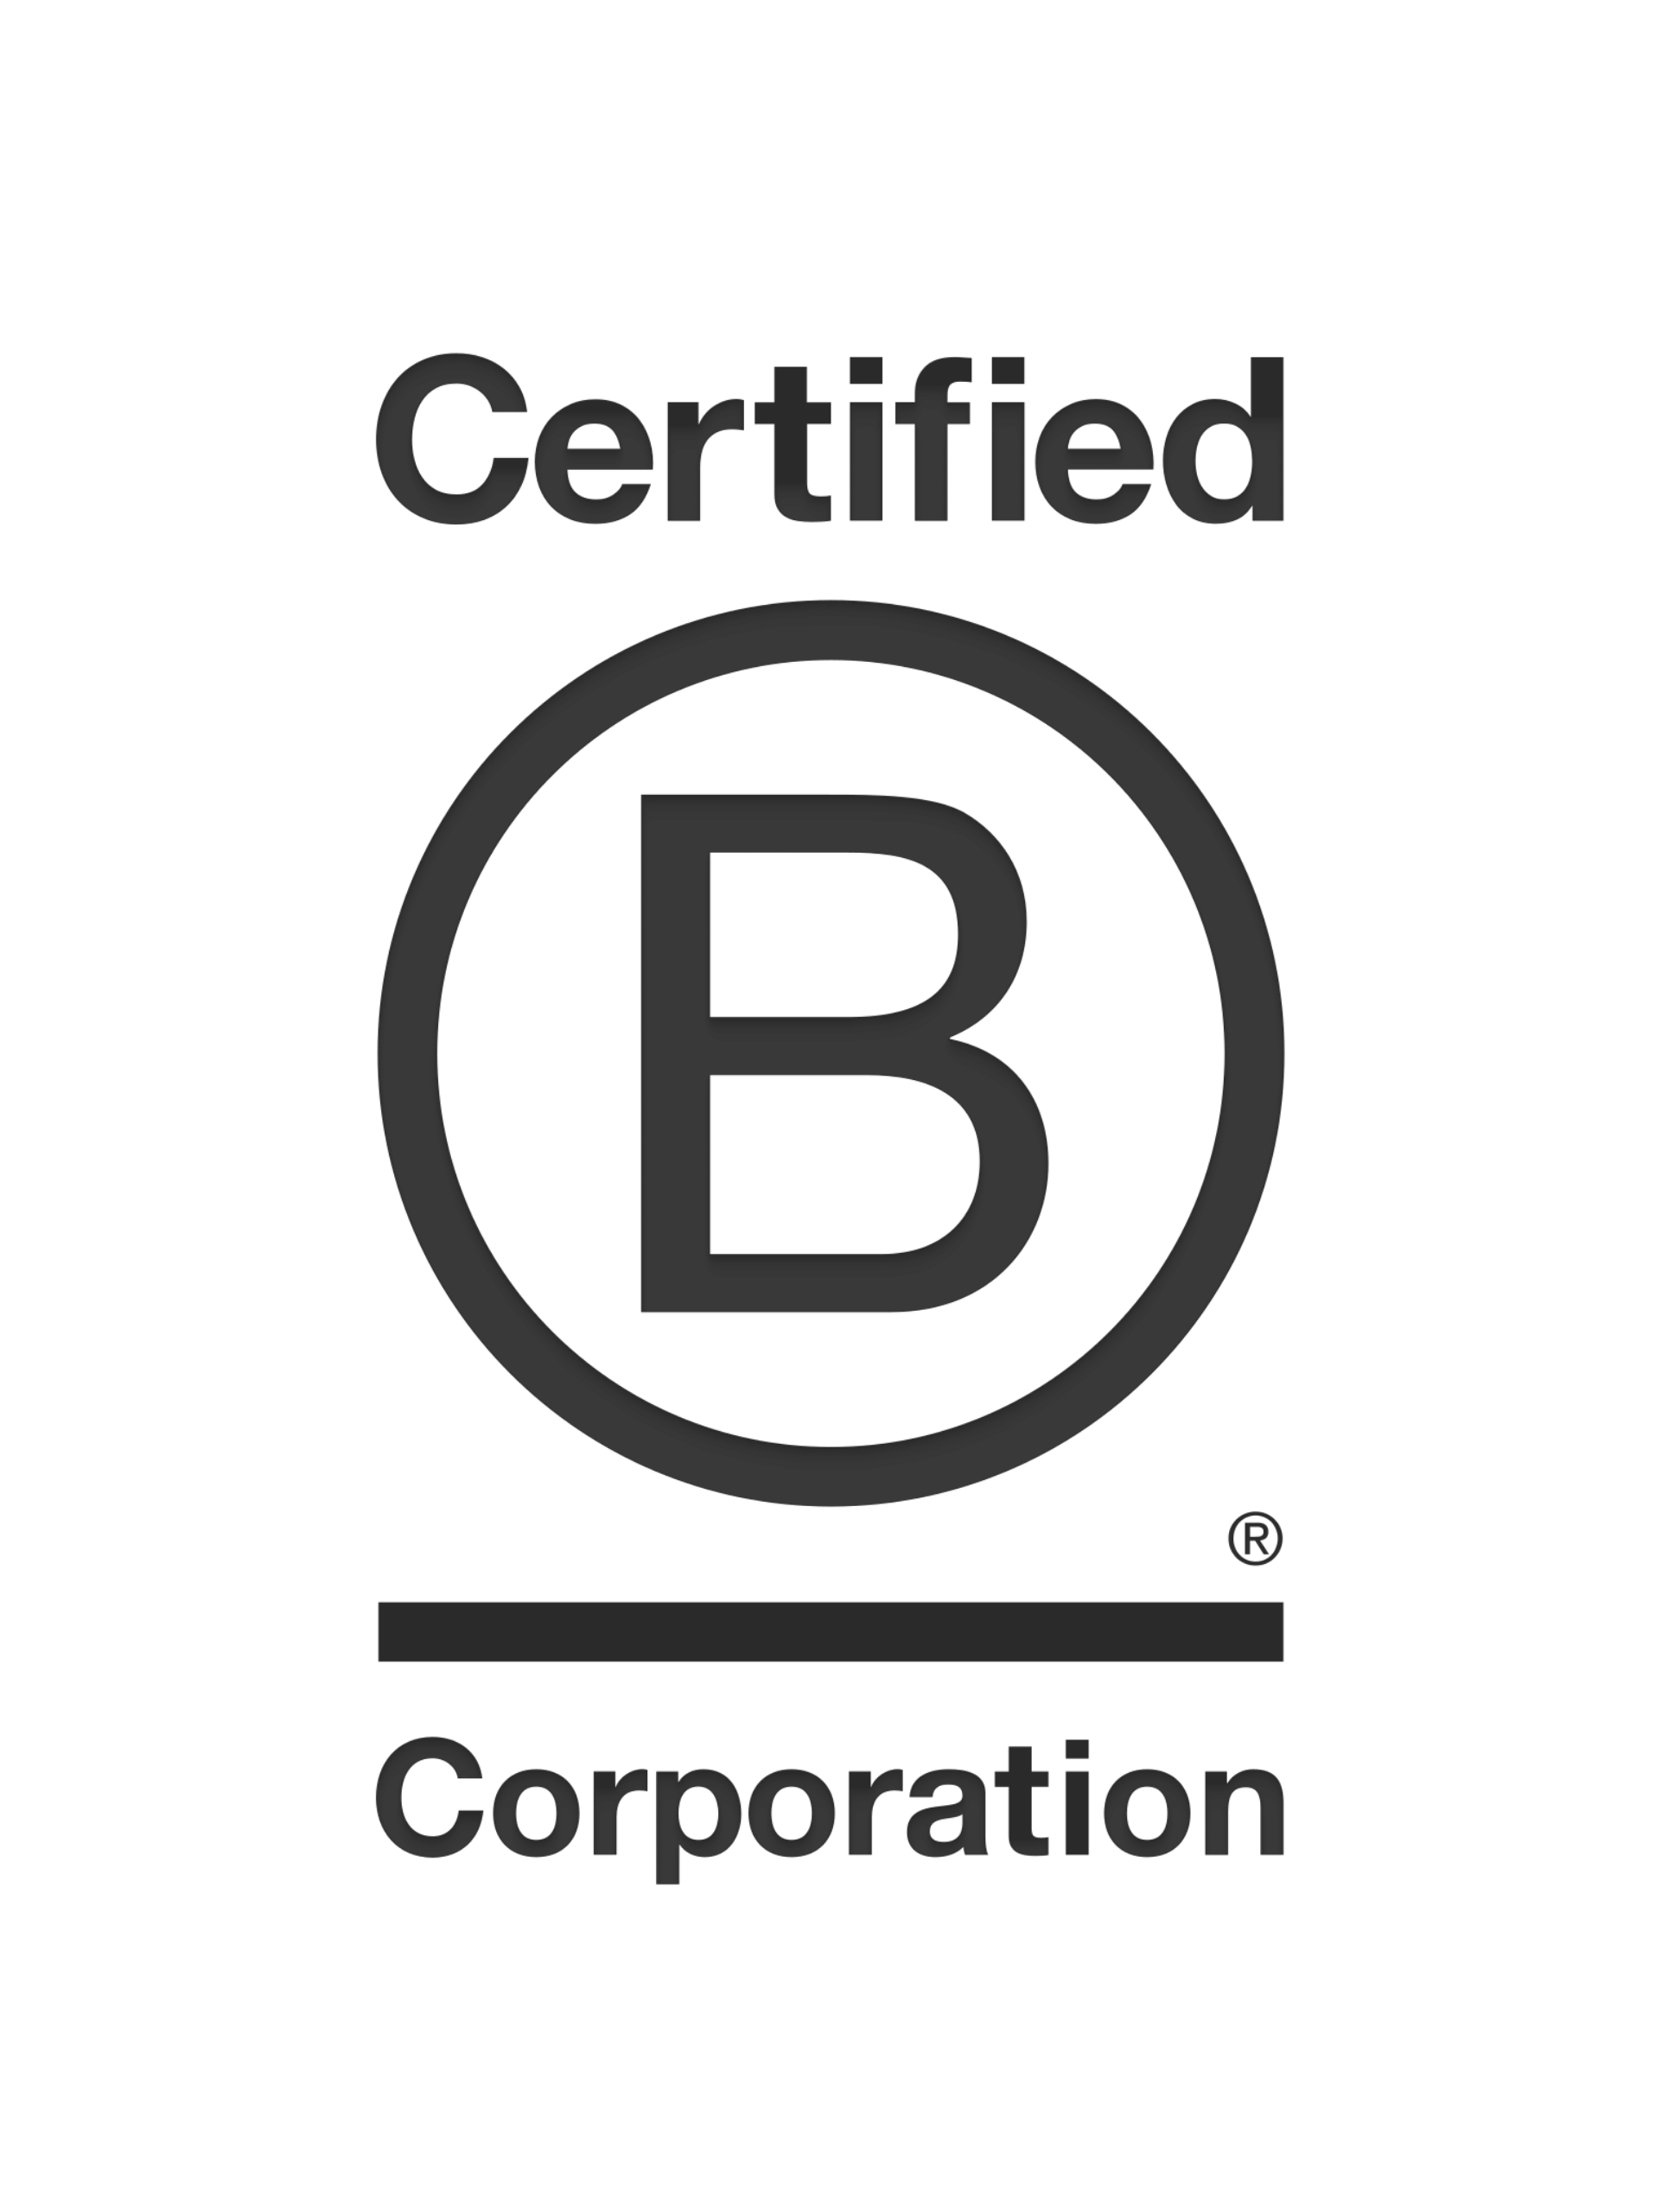 Stonyfield Organic: Our History - Stonyfield Becomes a Certified B Corp